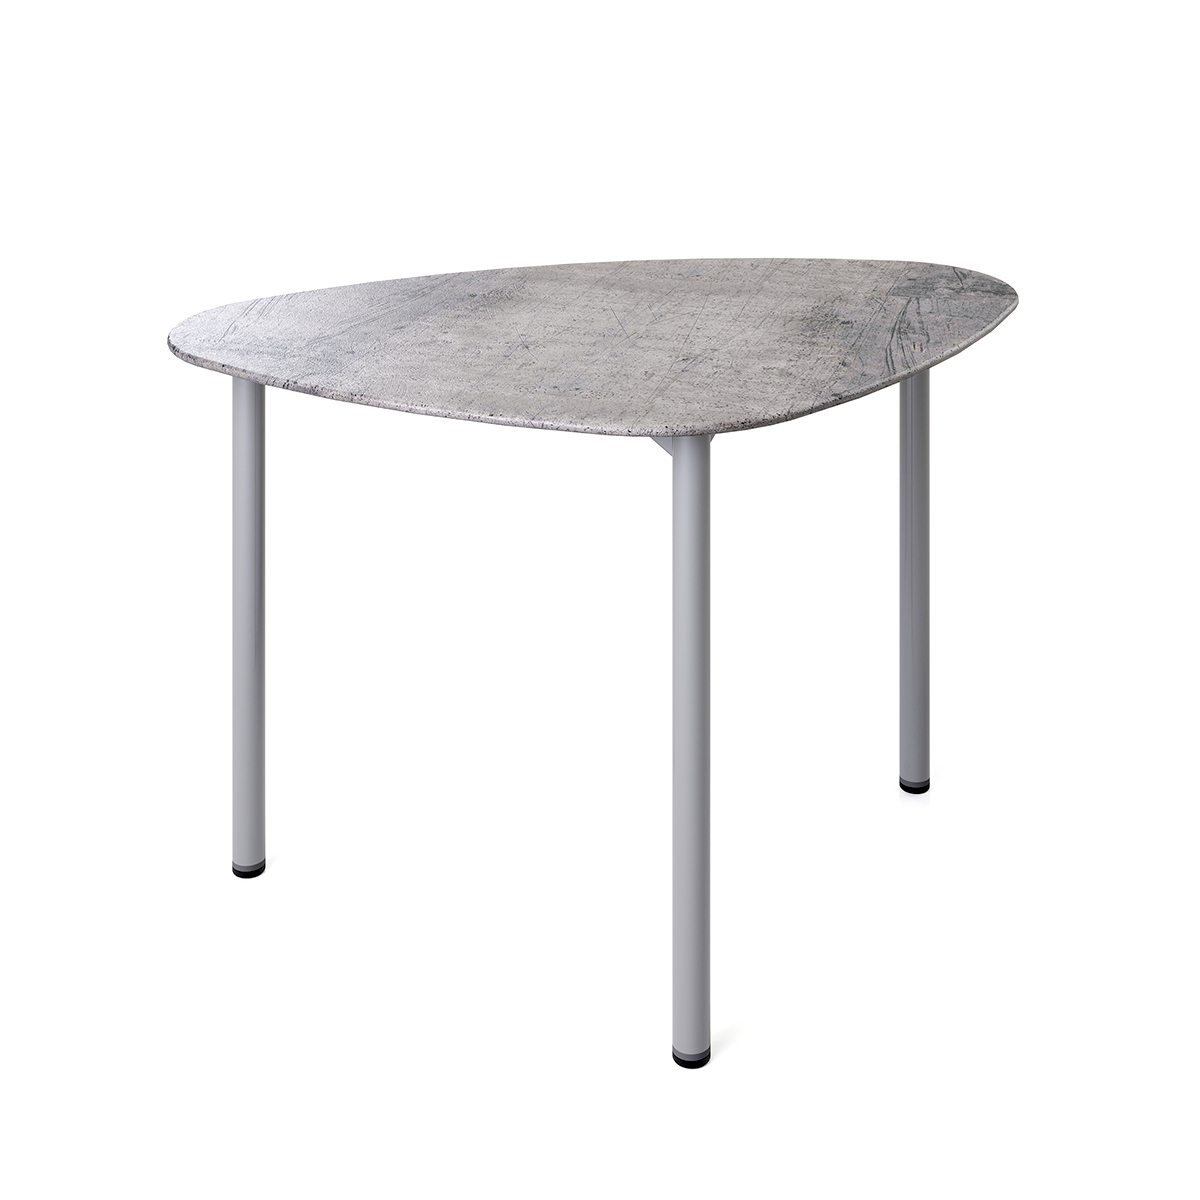 56203 Flowform Outdoor Clamshell Table